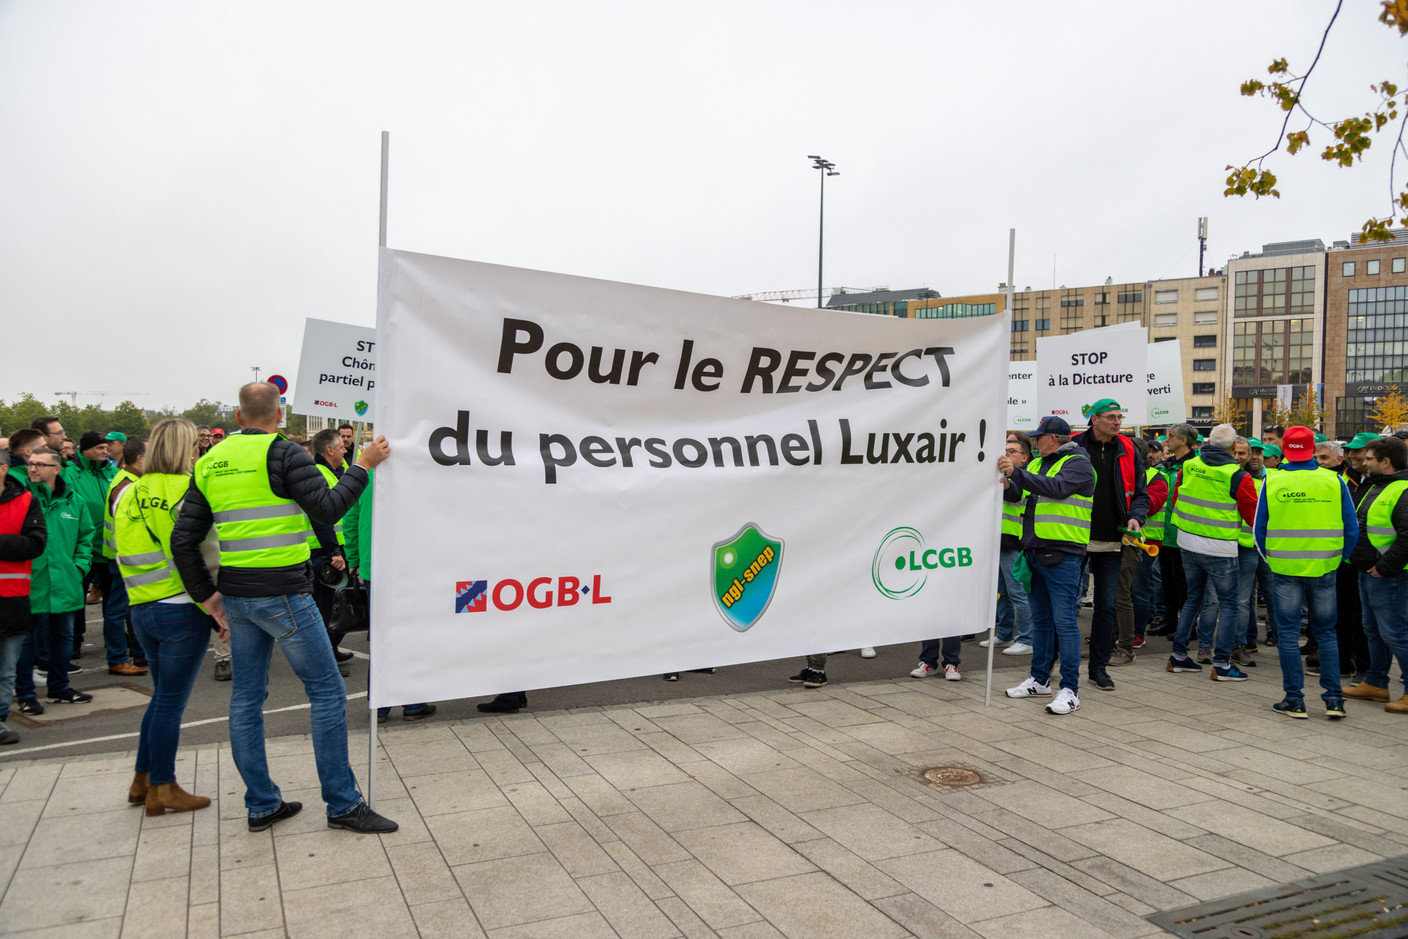 The unions are calling the treatment of staff unacceptable and demand better working conditions and a lighter workload for Luxair staff.  Romain Gamba